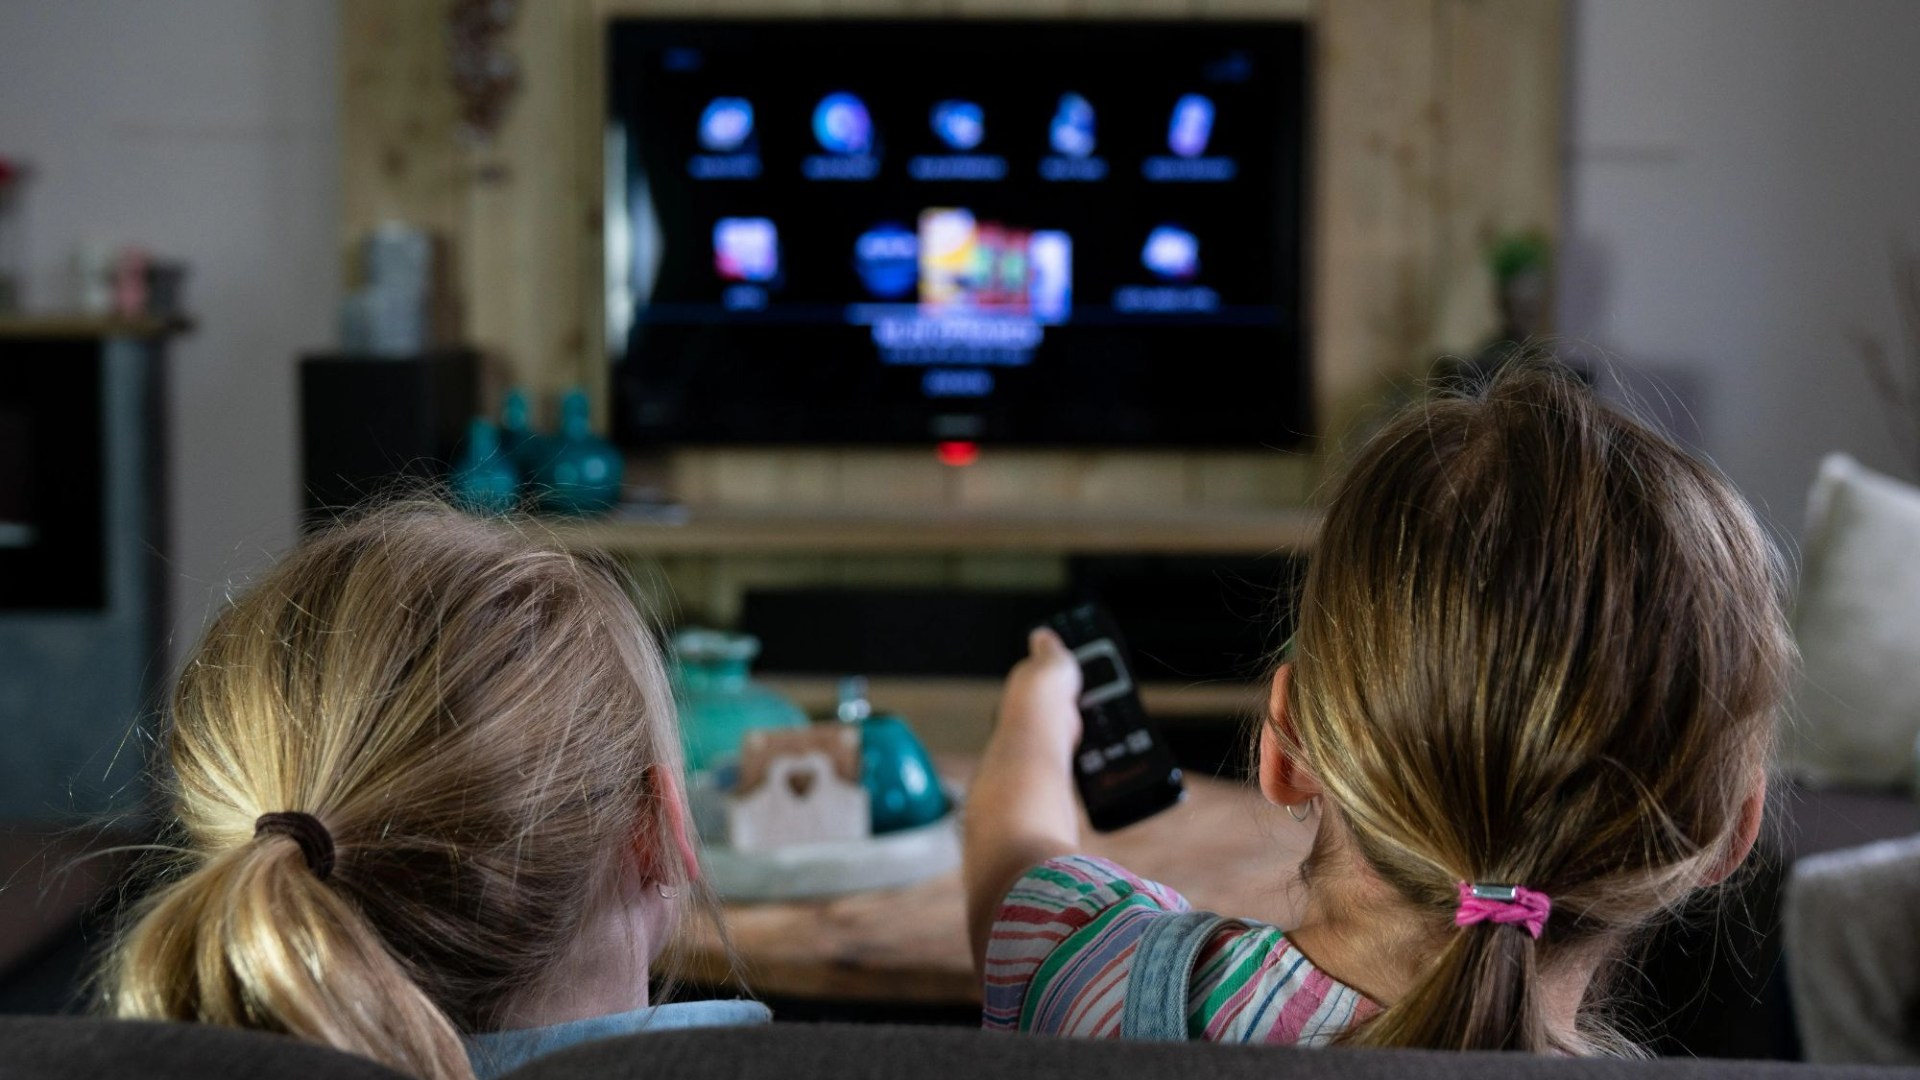 Millions of Brits to receive major free TV upgrade with access to five new live channels – are you eligible? [Video]